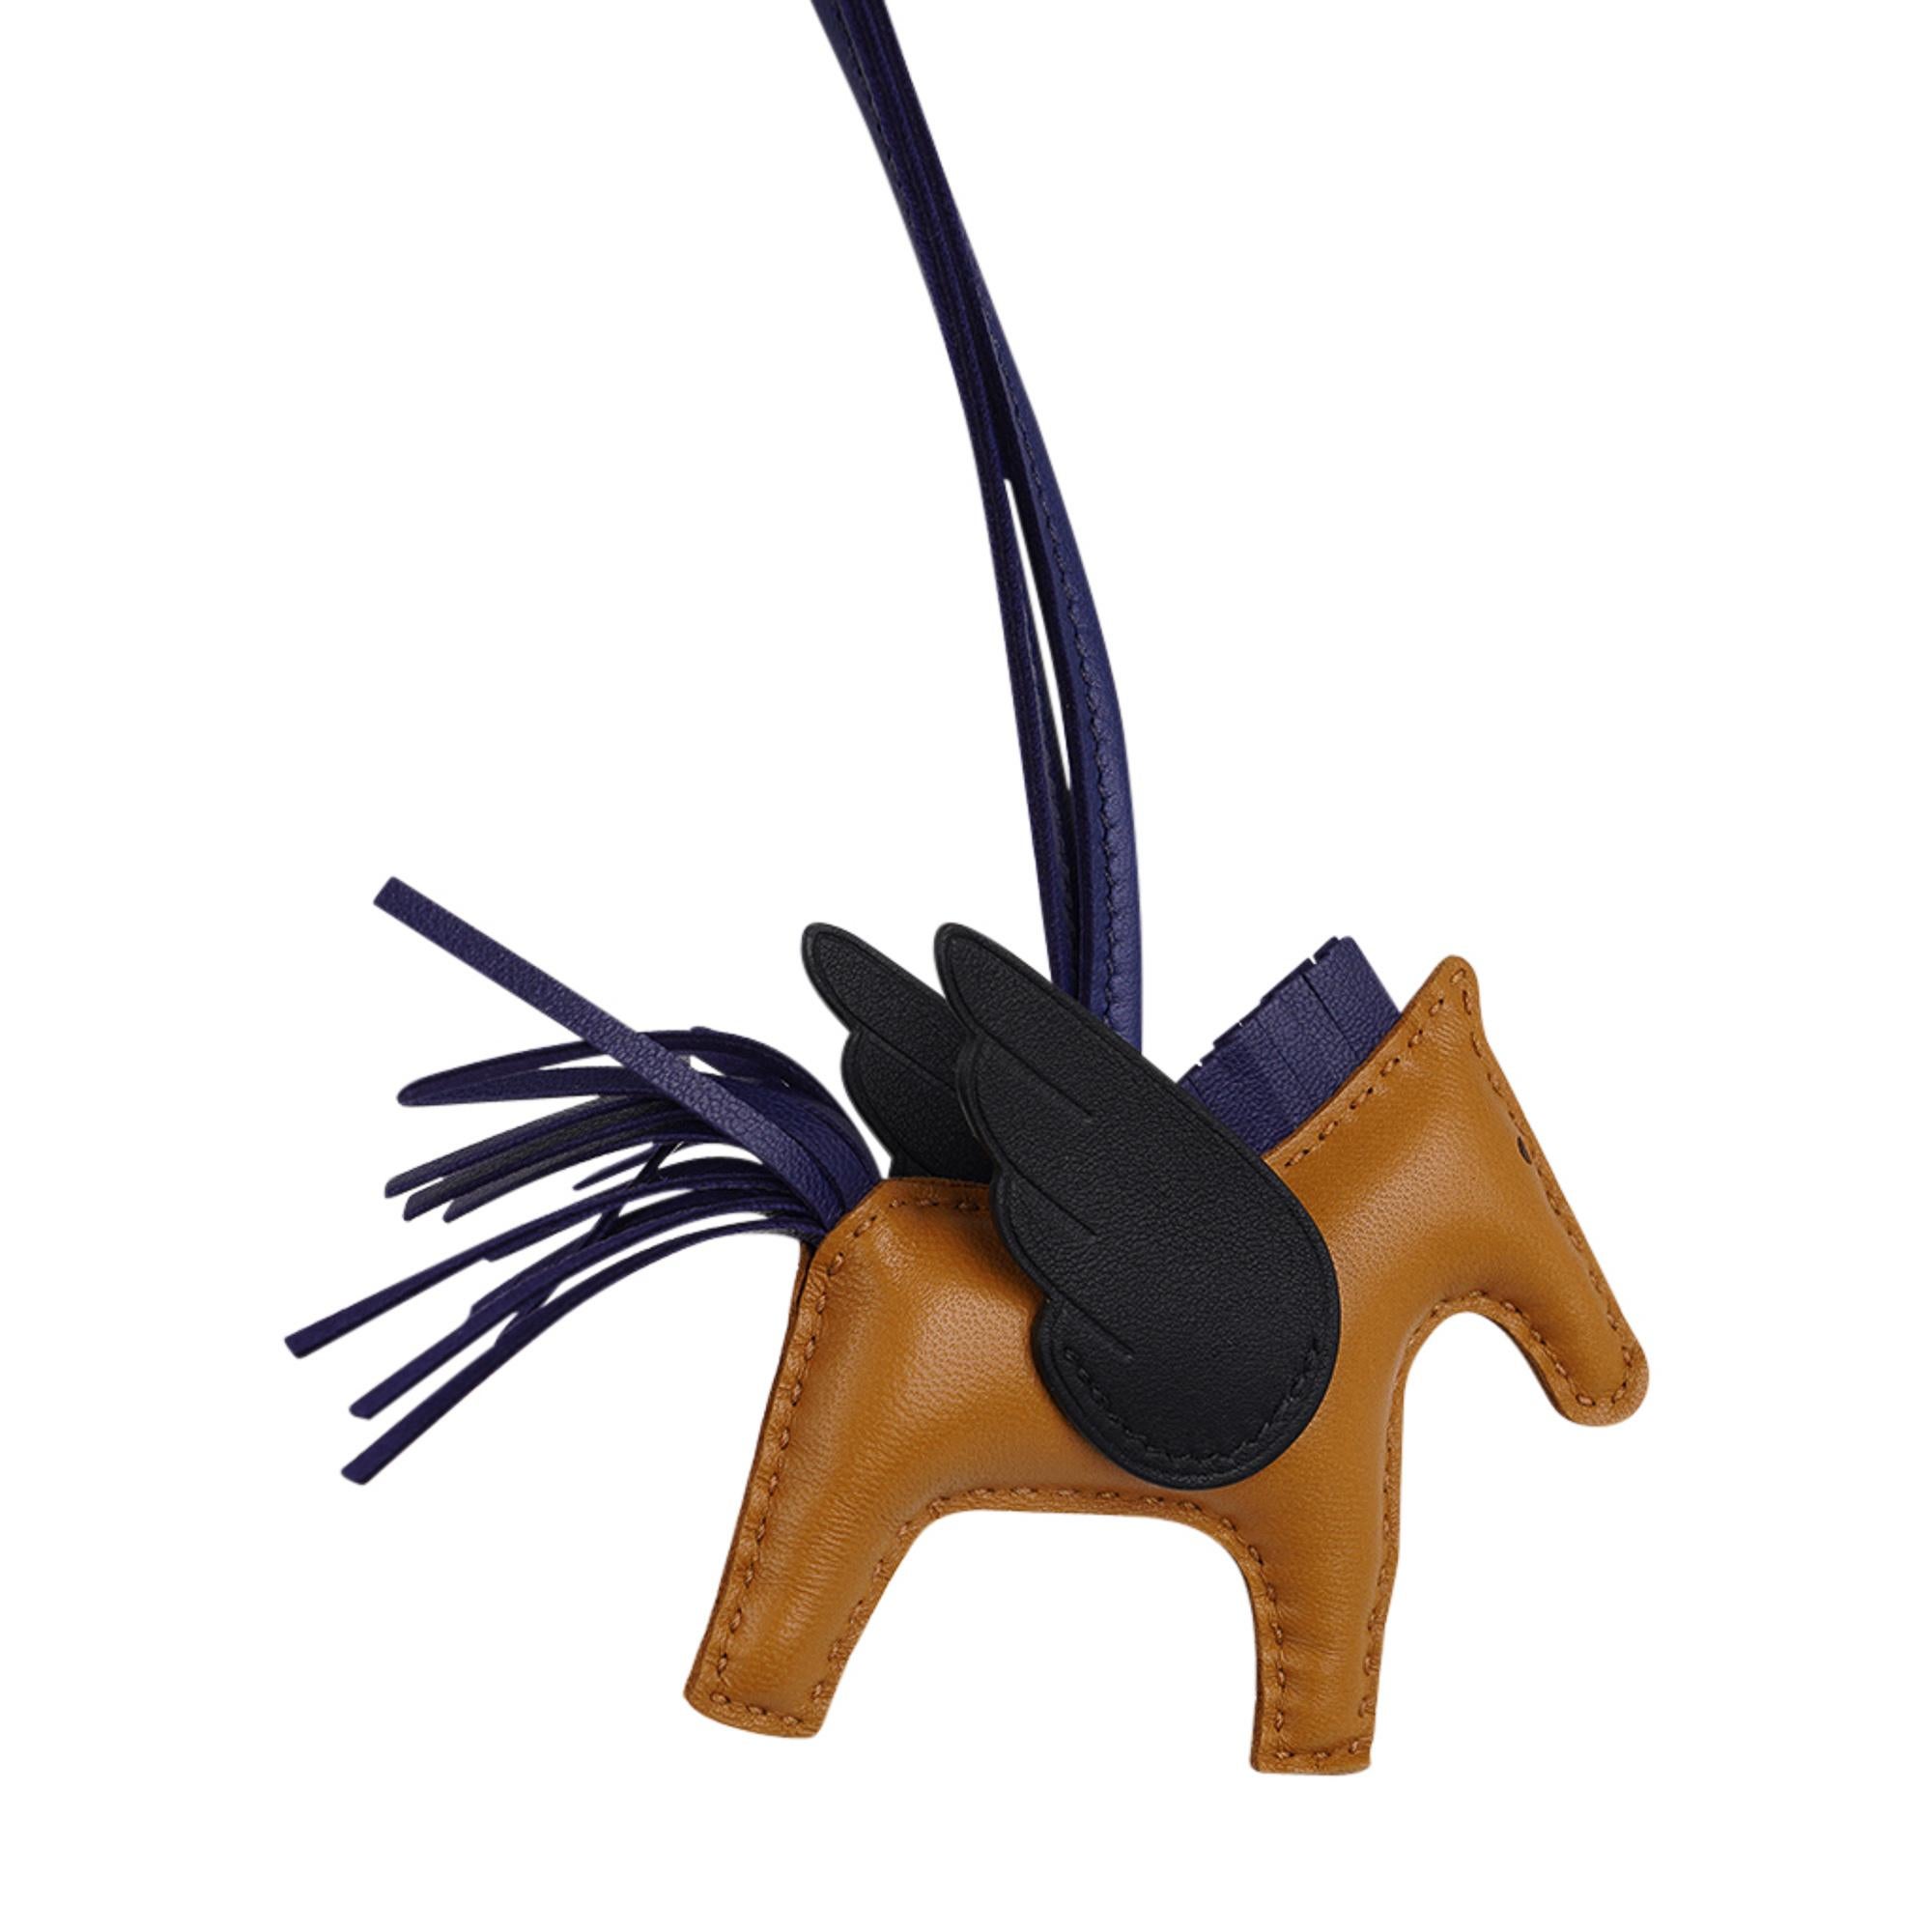 Mightychic offers an Hermes Pegase Rodeo PM bag charm featured in Sesame, Black and Bleu Saphir. (Blue Sapphire).
Charming and playful she easily adorns a myriad bag colours in your fabulous collection. 
Leather is lambskin Milo.
Signature HERMES